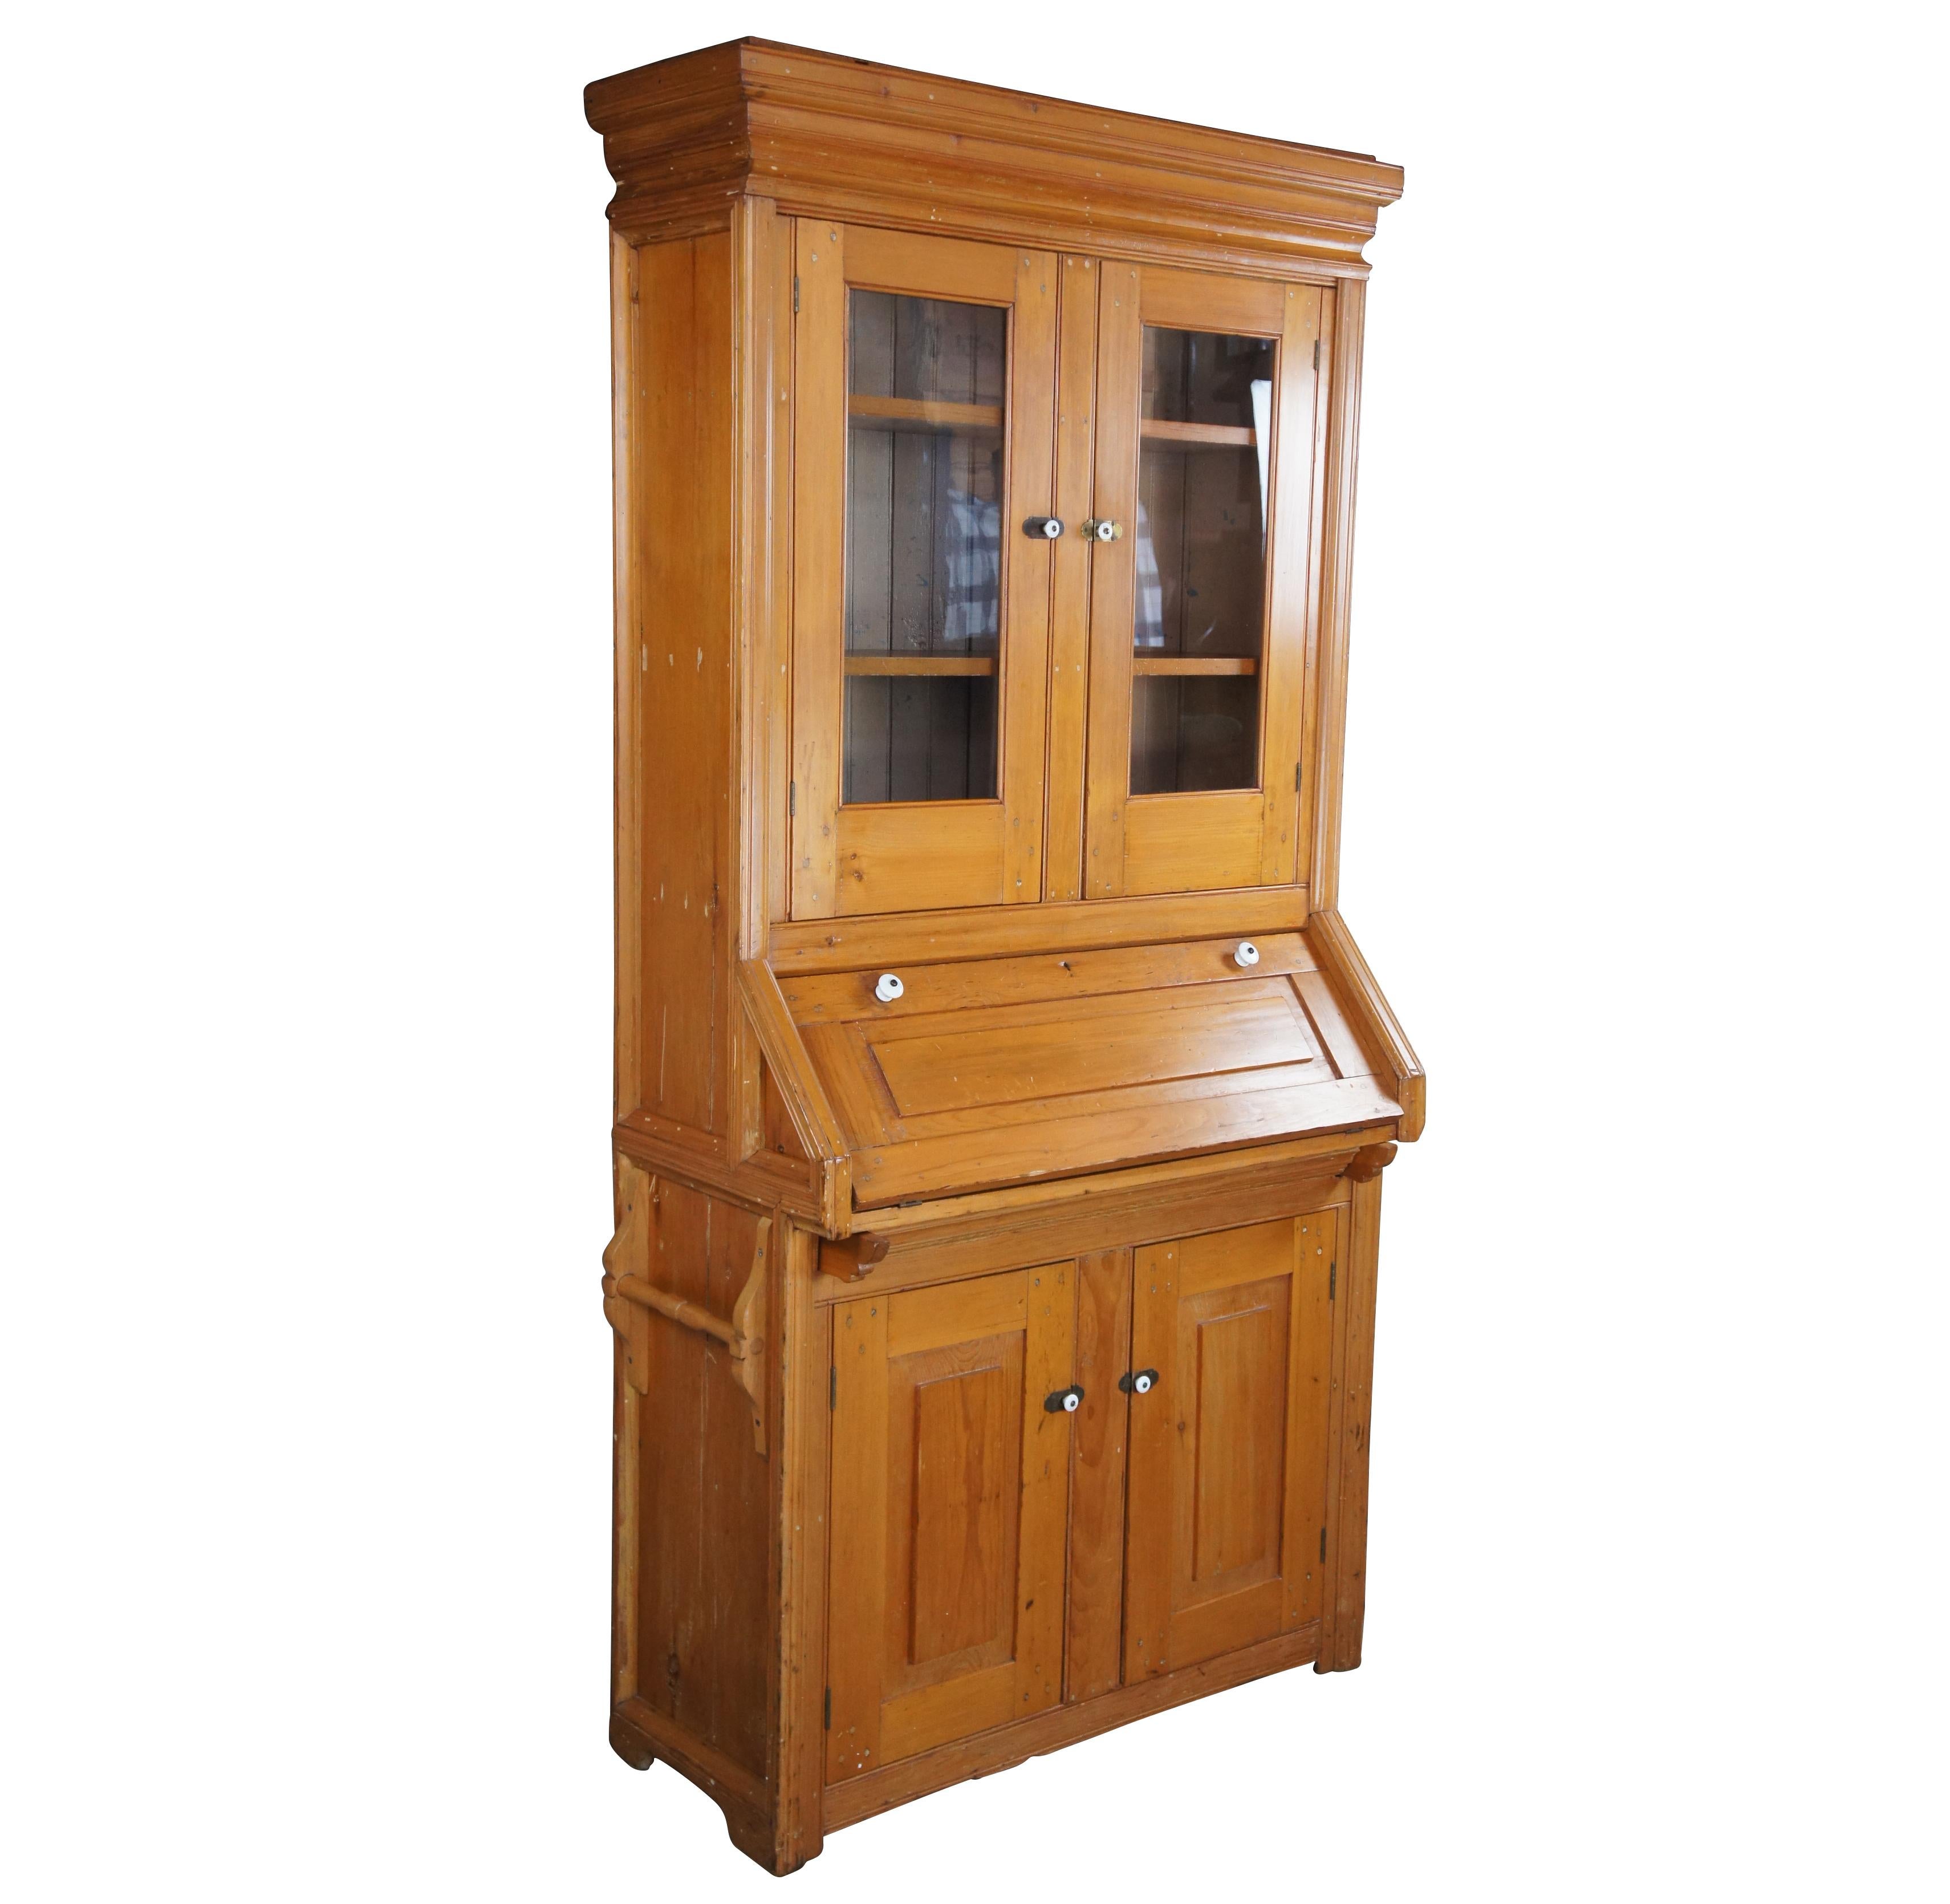 An early 20th century pine secretary desk or cupboard. Features an glass covered upper bookcase with two shelves, drop front writing surface with shelf and lower cabinet with shelf for accessory storage Cabinet and door pulls are made from brass and